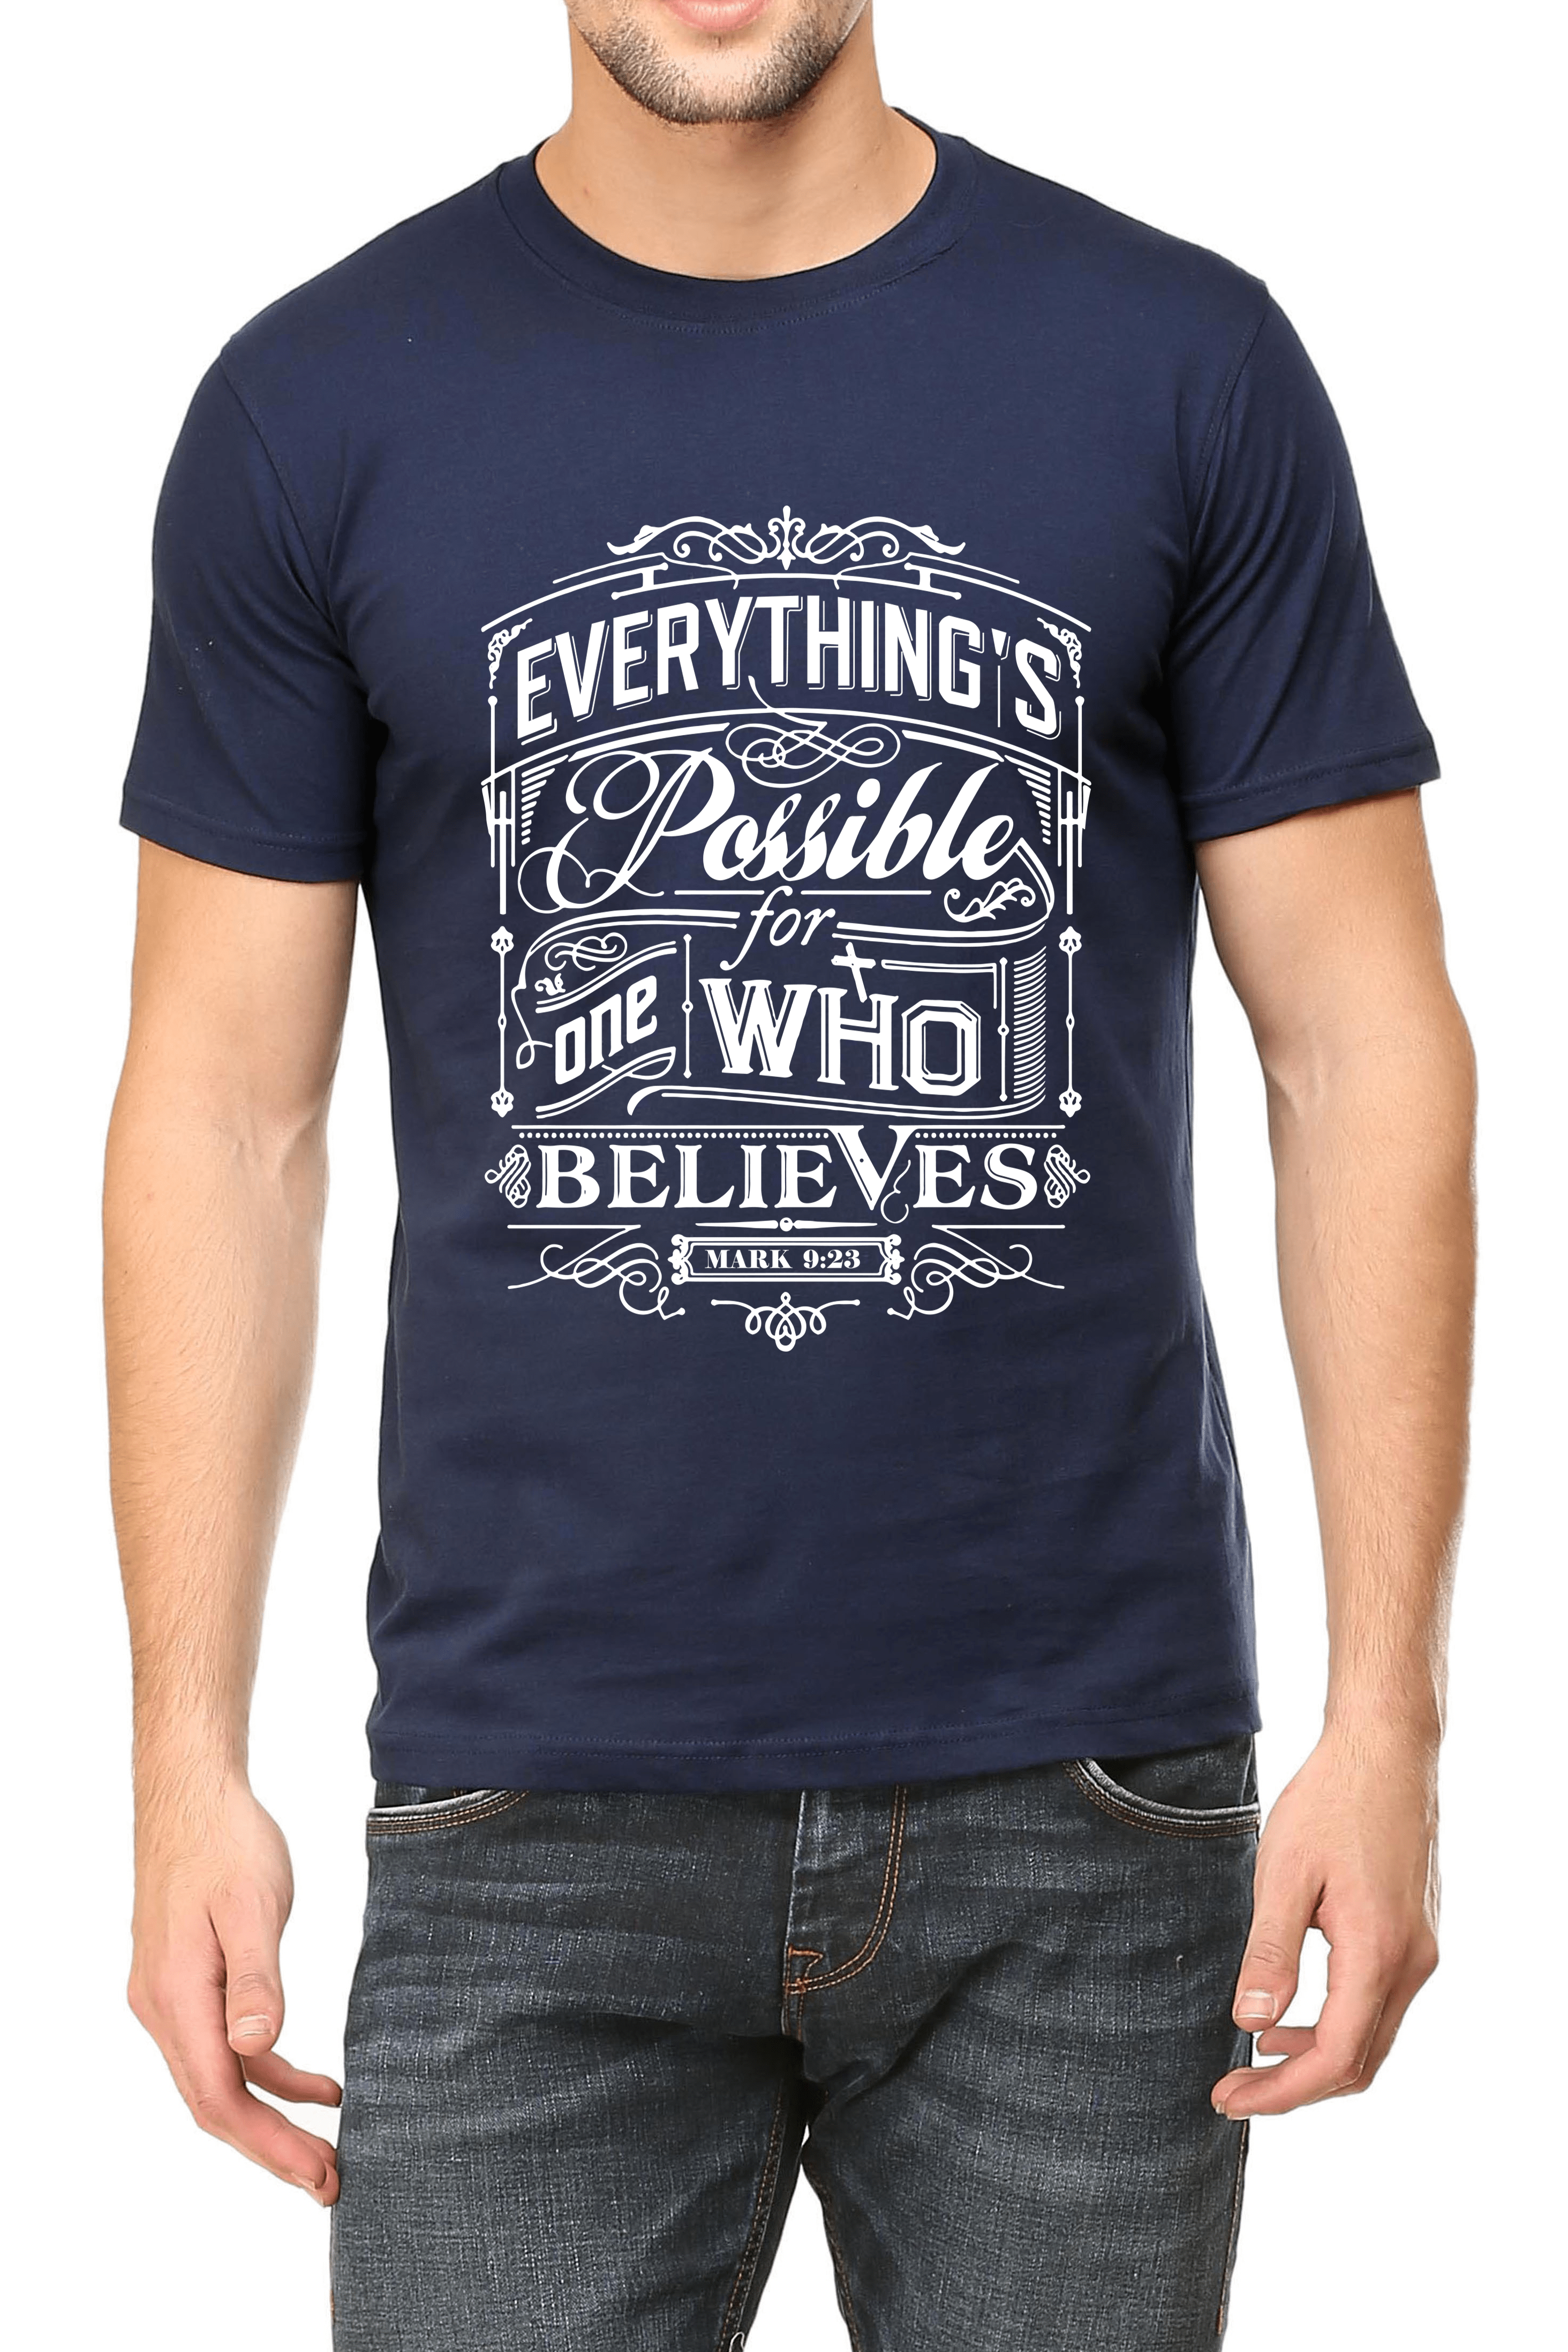 Living Words Men Round Neck T Shirt S / Navy Blue Everything possible - Christian T-Shirt